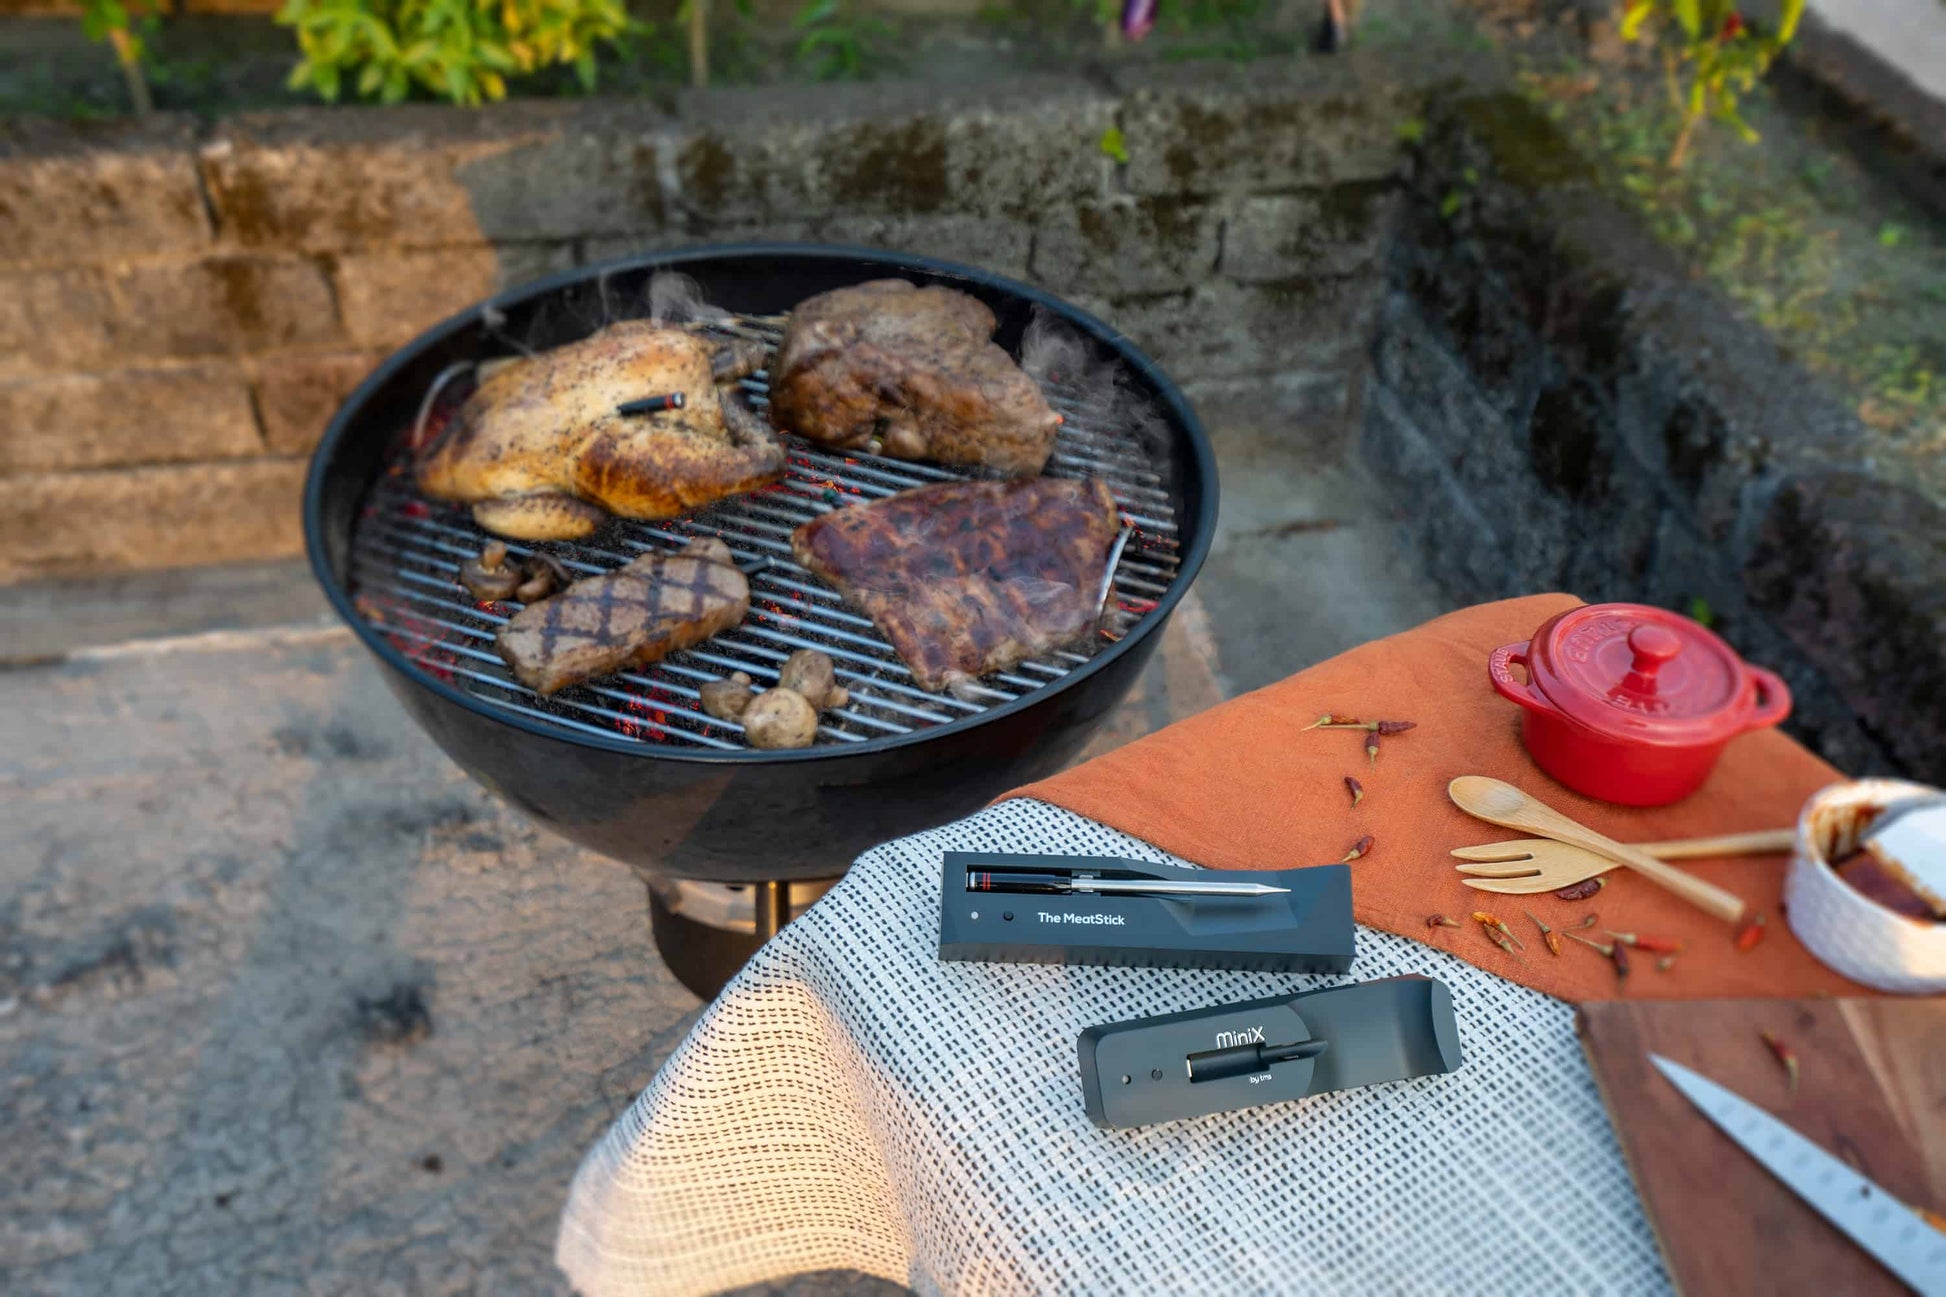 The MeatStick Wireless Meat Thermometer For BBQ & Kitchen